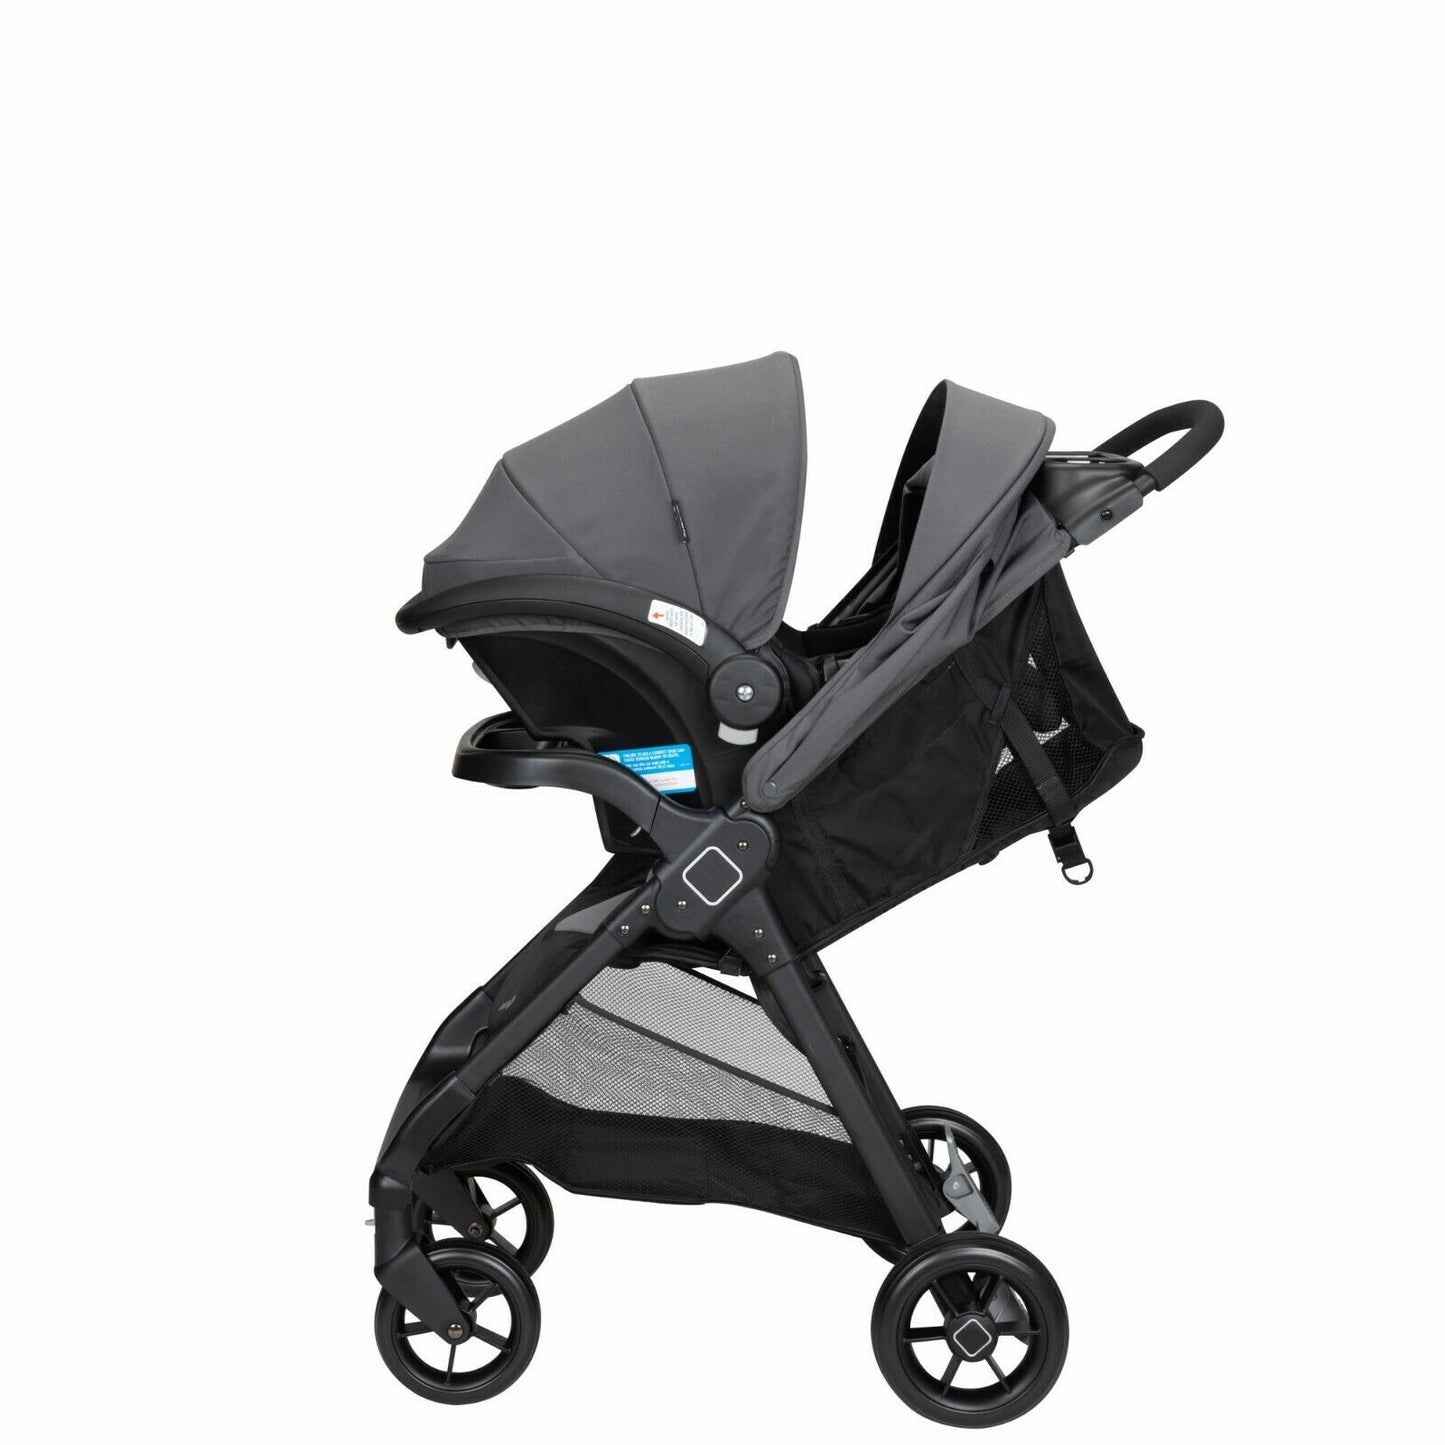 Baby Boy Stroller with Car Seat Travel System Playard Bassinet Bag Combo New